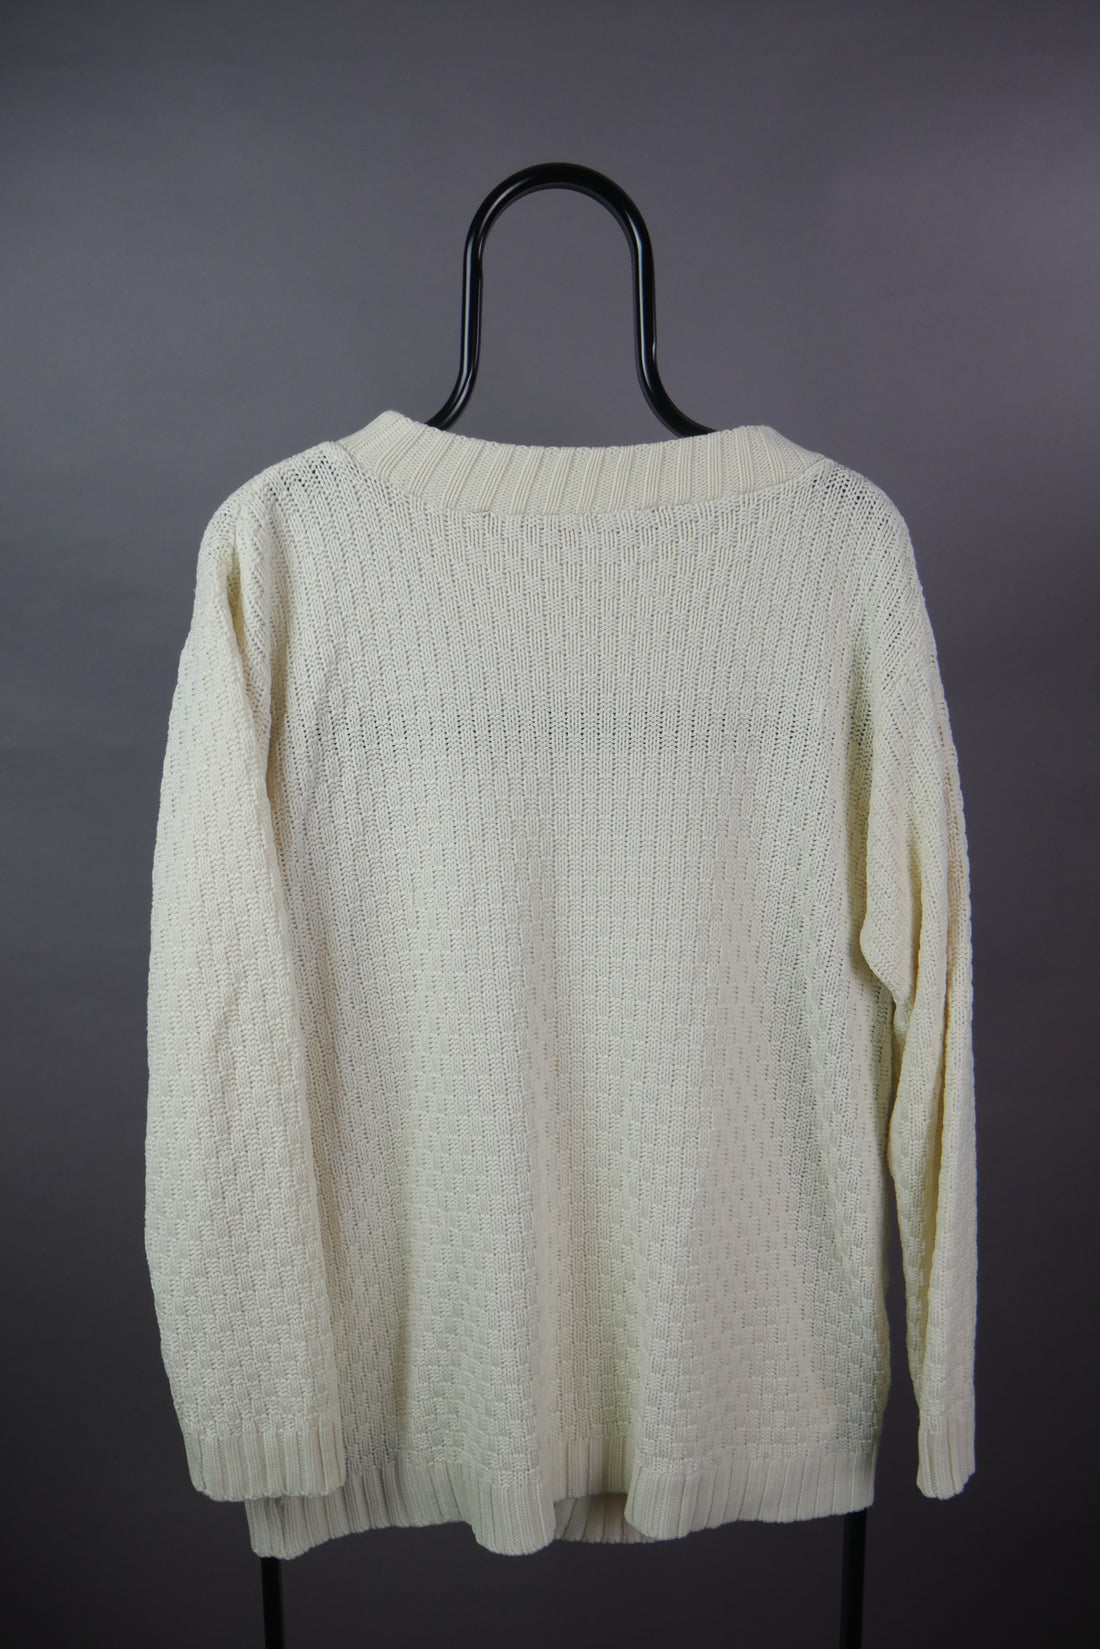 The Cotton Knit Sweater (XL)